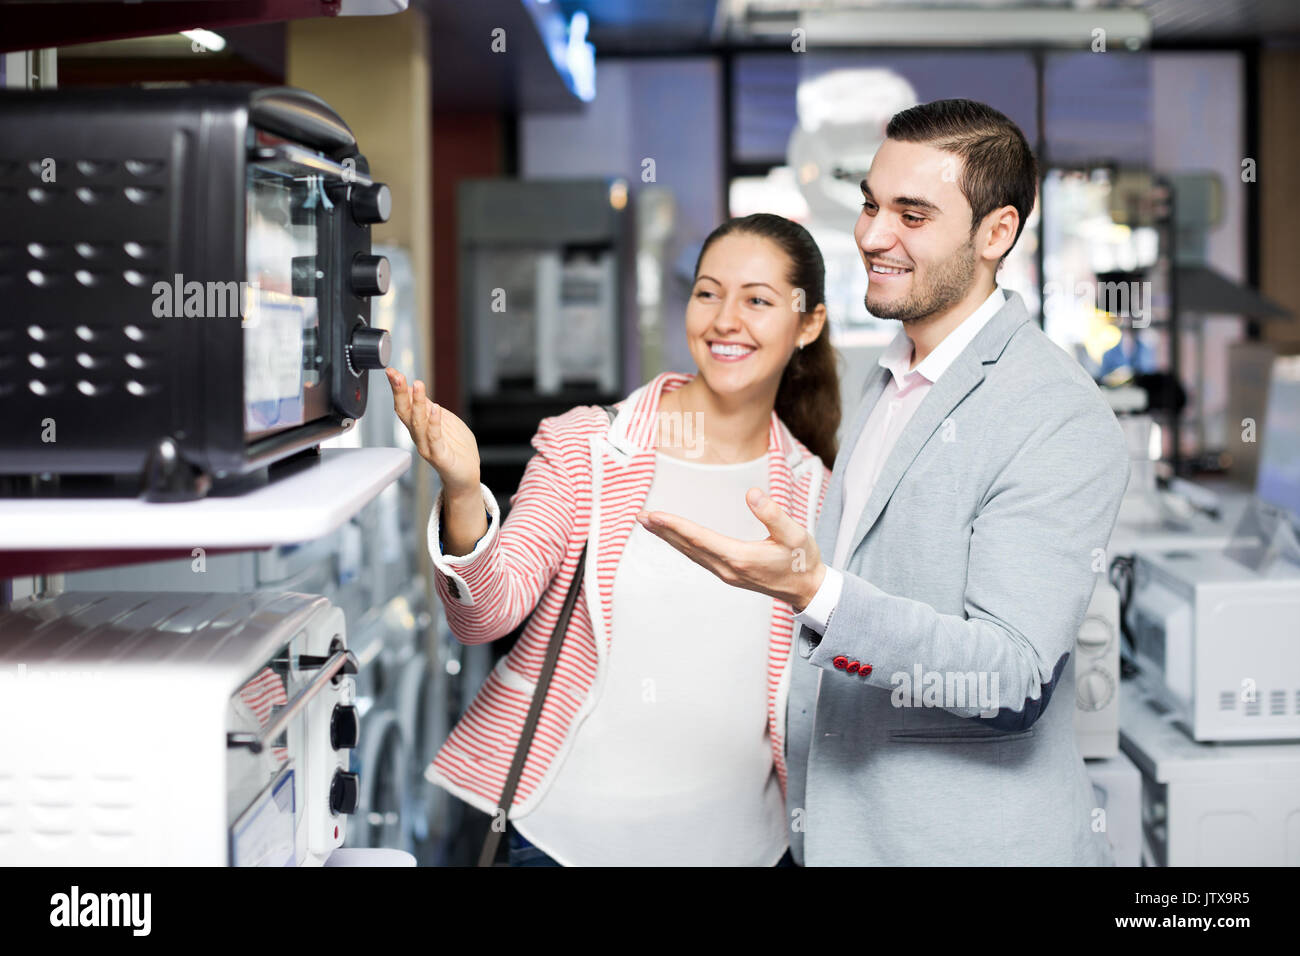 Cheerful family couple choosing new microwave in supermarket. Focus on the man Stock Photo